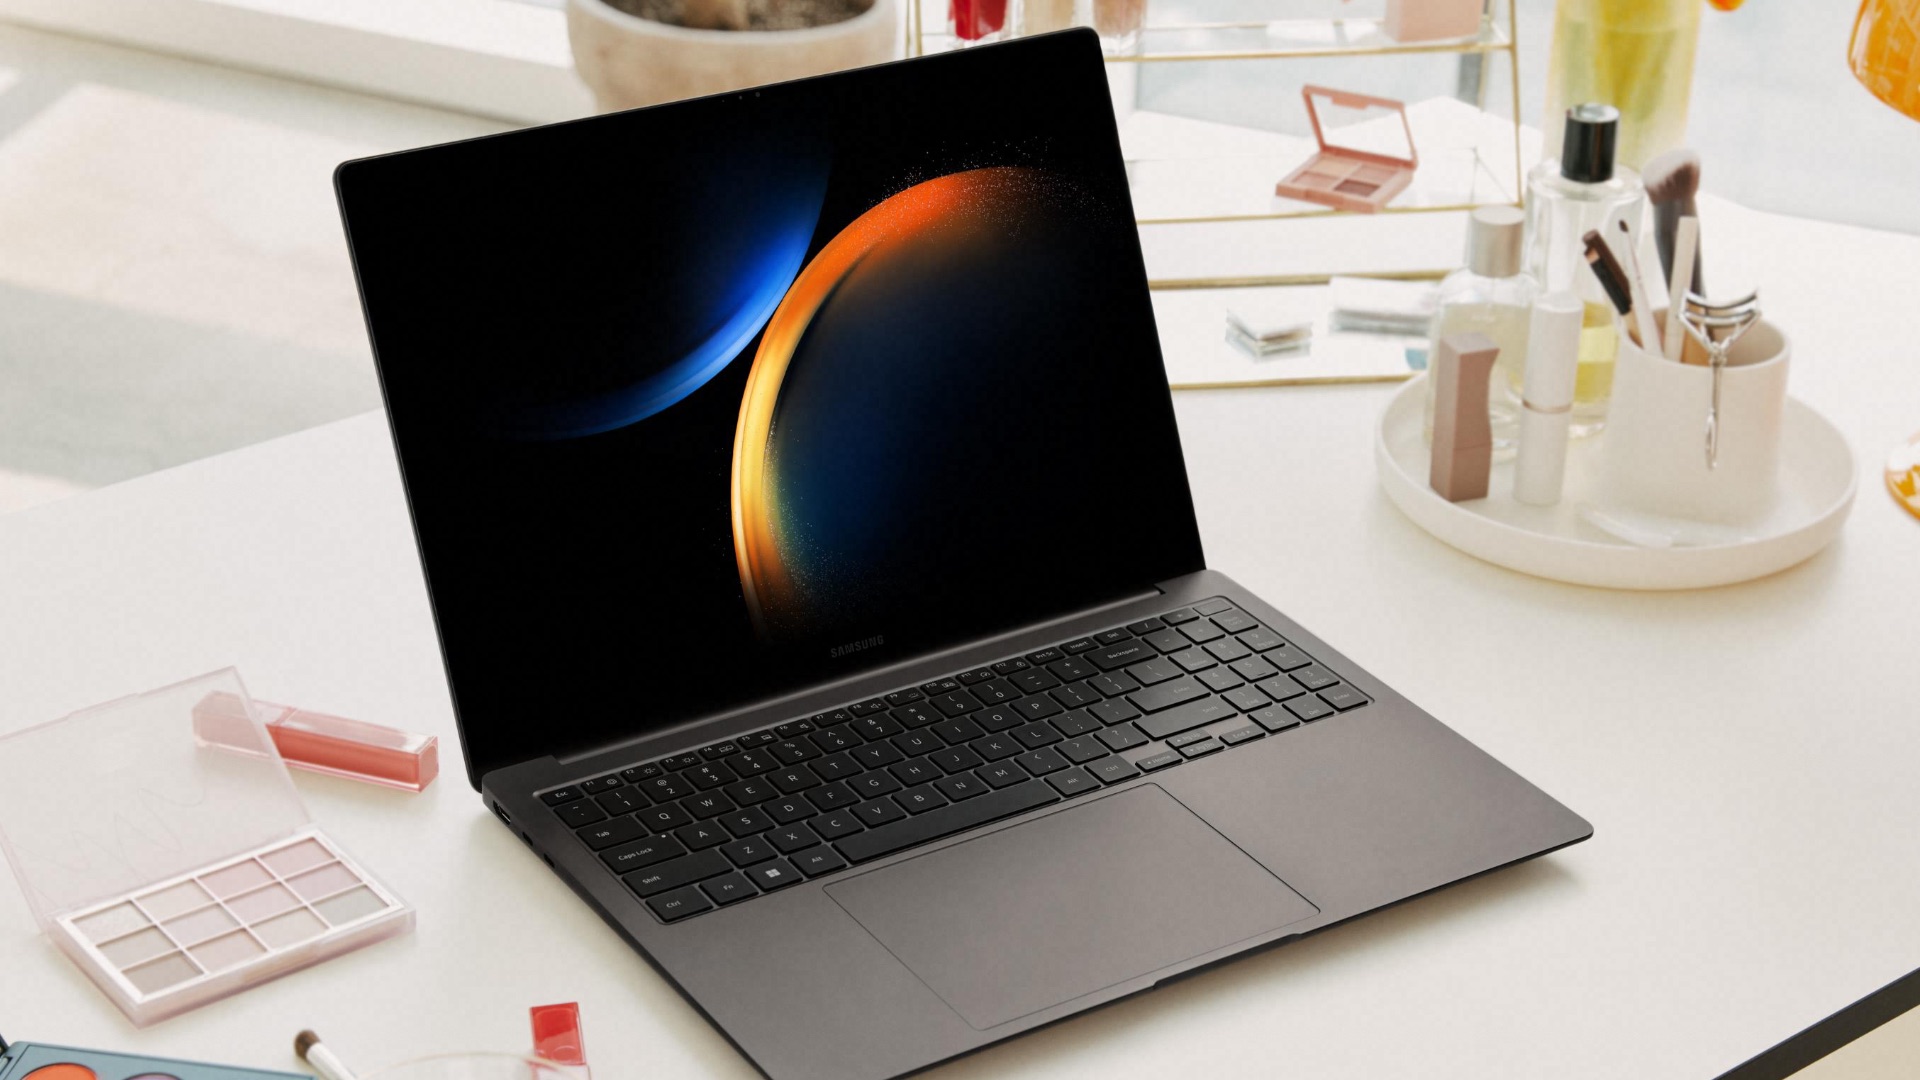 Galaxy Book3 is a line of products from Samsung that includes three computers with various specialties